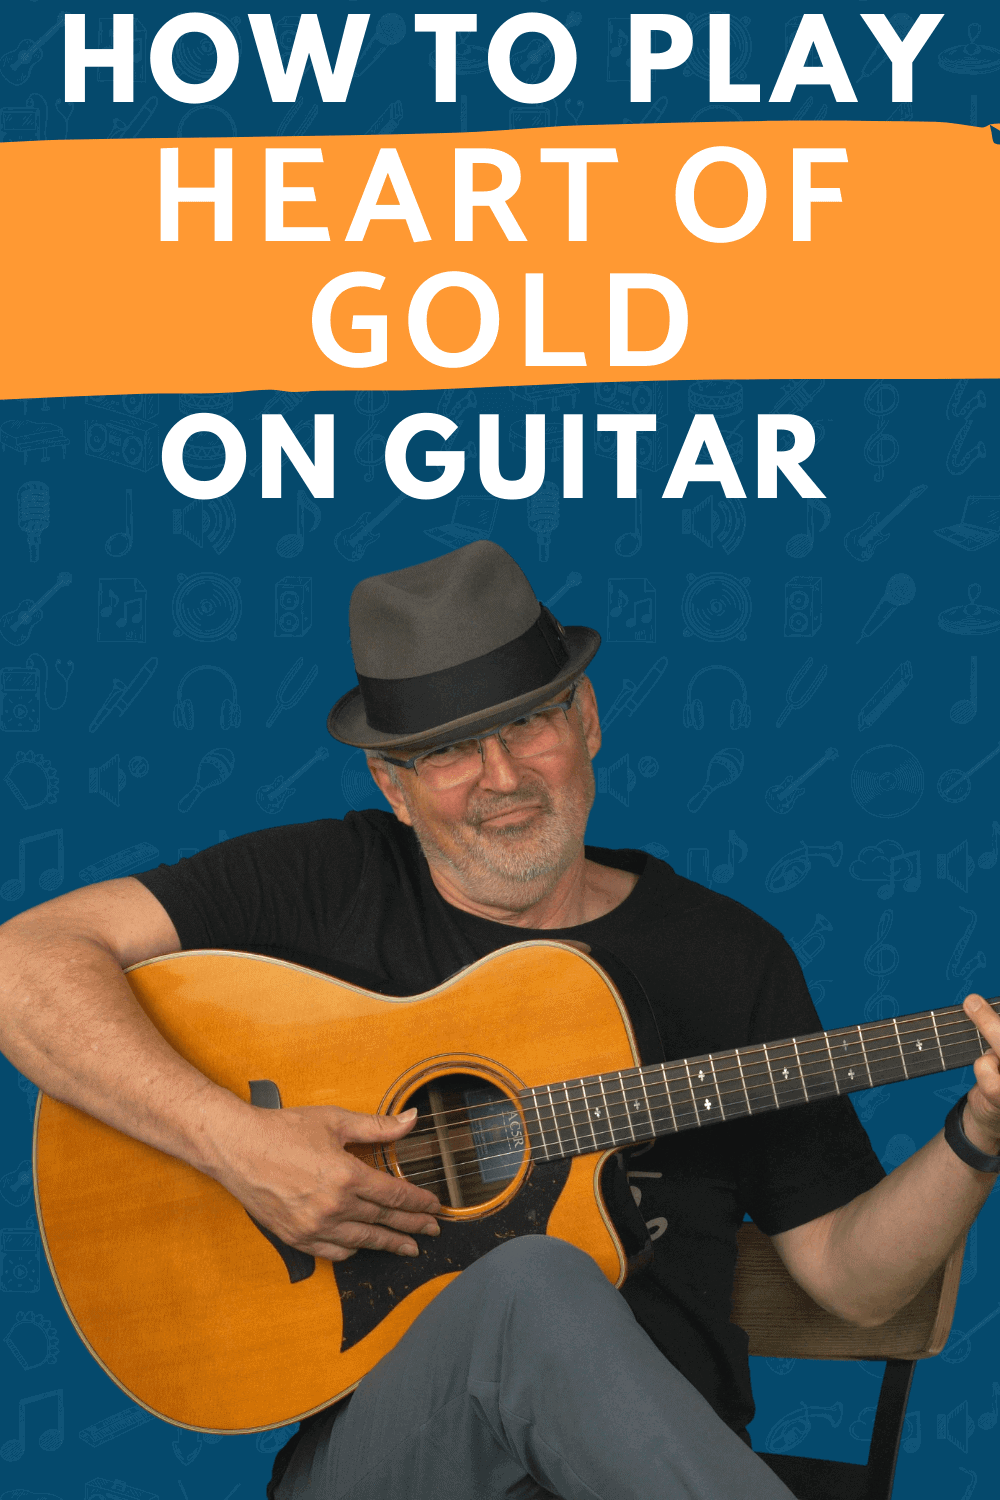 HOW TO PLAY HEART OF GOLD ON GUITAR